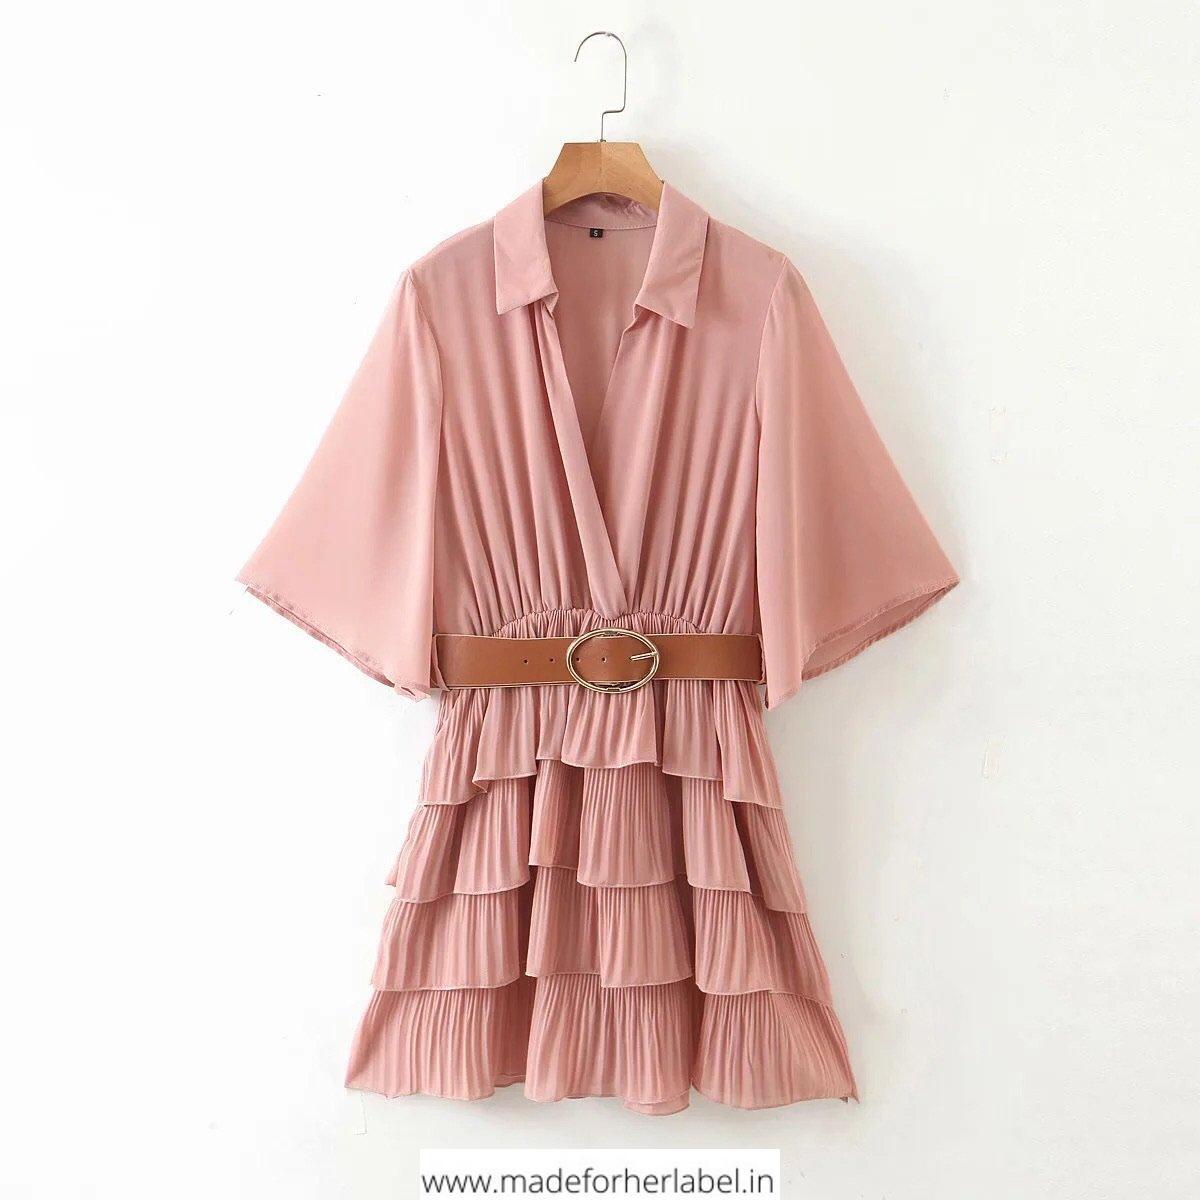 V Neck Ruffle Pleated Dress - Made For Her Label